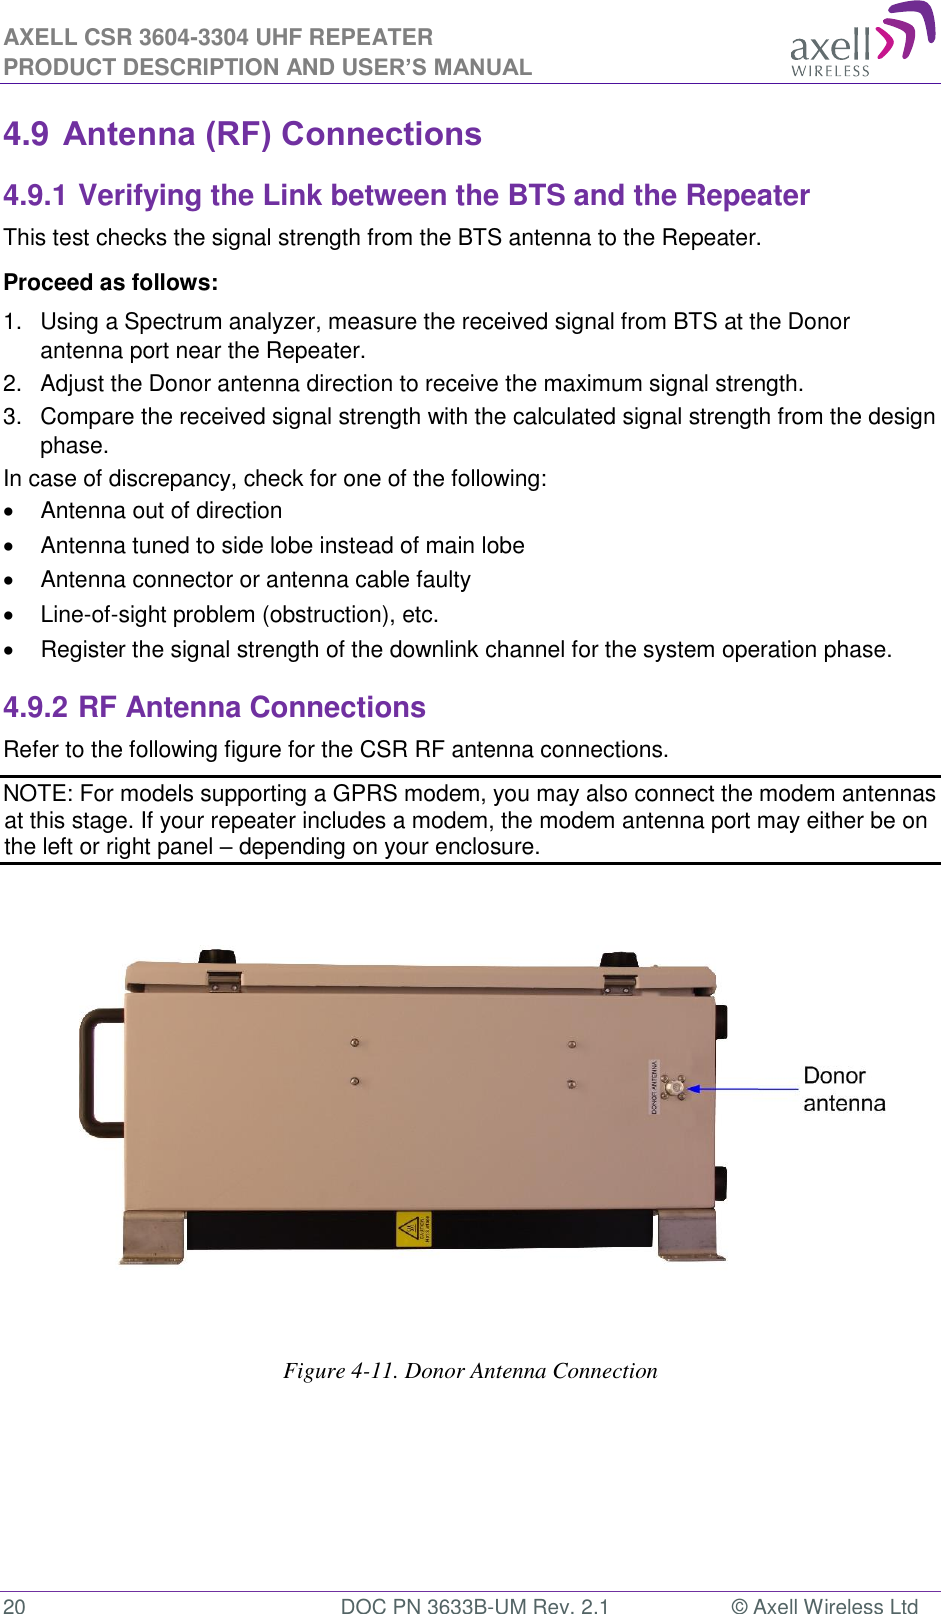 AXELL CSR 3604-3304 UHF REPEATER PRODUCT DESCRIPTION AND USER’S MANUAL  20  DOC PN 3633B-UM Rev. 2.1  © Axell Wireless Ltd  4.9 Antenna (RF) Connections 4.9.1 Verifying the Link between the BTS and the Repeater This test checks the signal strength from the BTS antenna to the Repeater.  Proceed as follows:  1.  Using a Spectrum analyzer, measure the received signal from BTS at the Donor antenna port near the Repeater.  2.  Adjust the Donor antenna direction to receive the maximum signal strength. 3.  Compare the received signal strength with the calculated signal strength from the design phase.  In case of discrepancy, check for one of the following:    Antenna out of direction    Antenna tuned to side lobe instead of main lobe    Antenna connector or antenna cable faulty    Line-of-sight problem (obstruction), etc.   Register the signal strength of the downlink channel for the system operation phase. 4.9.2 RF Antenna Connections Refer to the following figure for the CSR RF antenna connections.  NOTE: For models supporting a GPRS modem, you may also connect the modem antennas at this stage. If your repeater includes a modem, the modem antenna port may either be on the left or right panel – depending on your enclosure.                   Figure 4-11. Donor Antenna Connection     